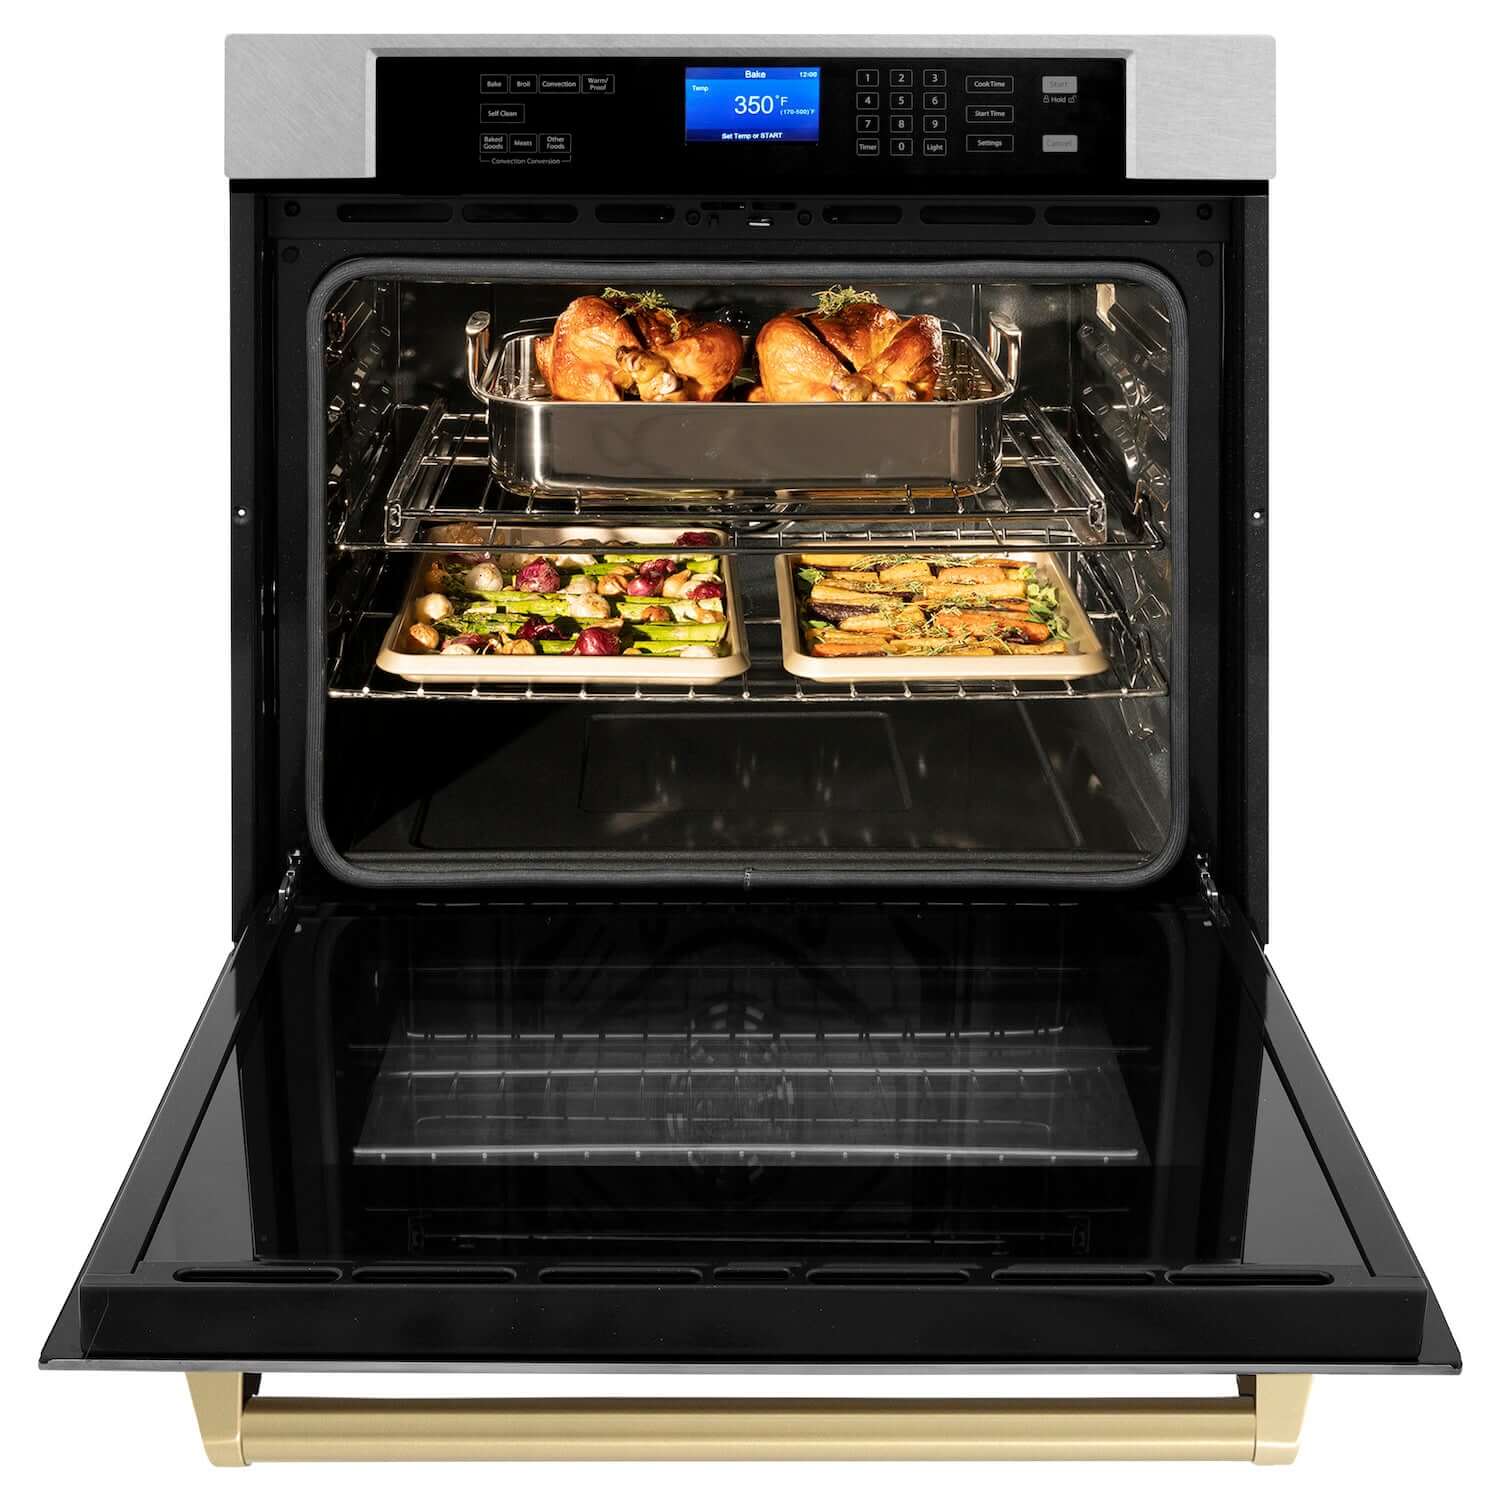 ZLINE Autograph Edition 30 in. Electric Single Wall Oven with Self Clean and True Convection in Fingerprint Resistant Stainless Steel and Champagne Bronze Accents (AWSSZ-30-CB) front, open.